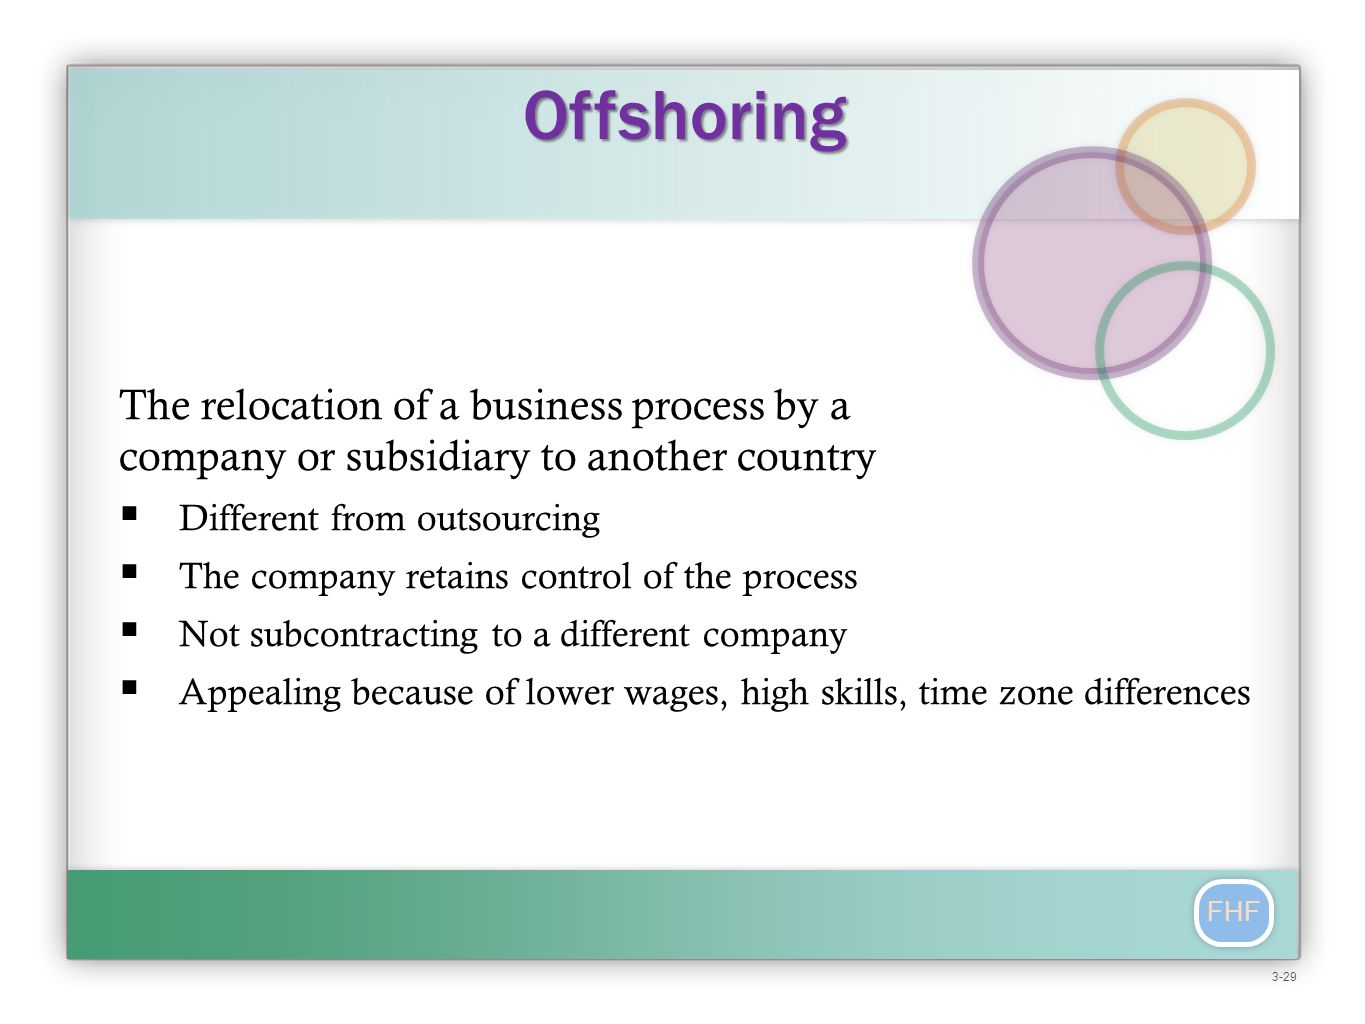 FHF The relocation of a business process by a company or subsidiary to another country  Different from outsourcing  The company retains control of the process  Not subcontracting to a different company  Appealing because of lower wages, high skills, time zone differences Offshoring 3-29